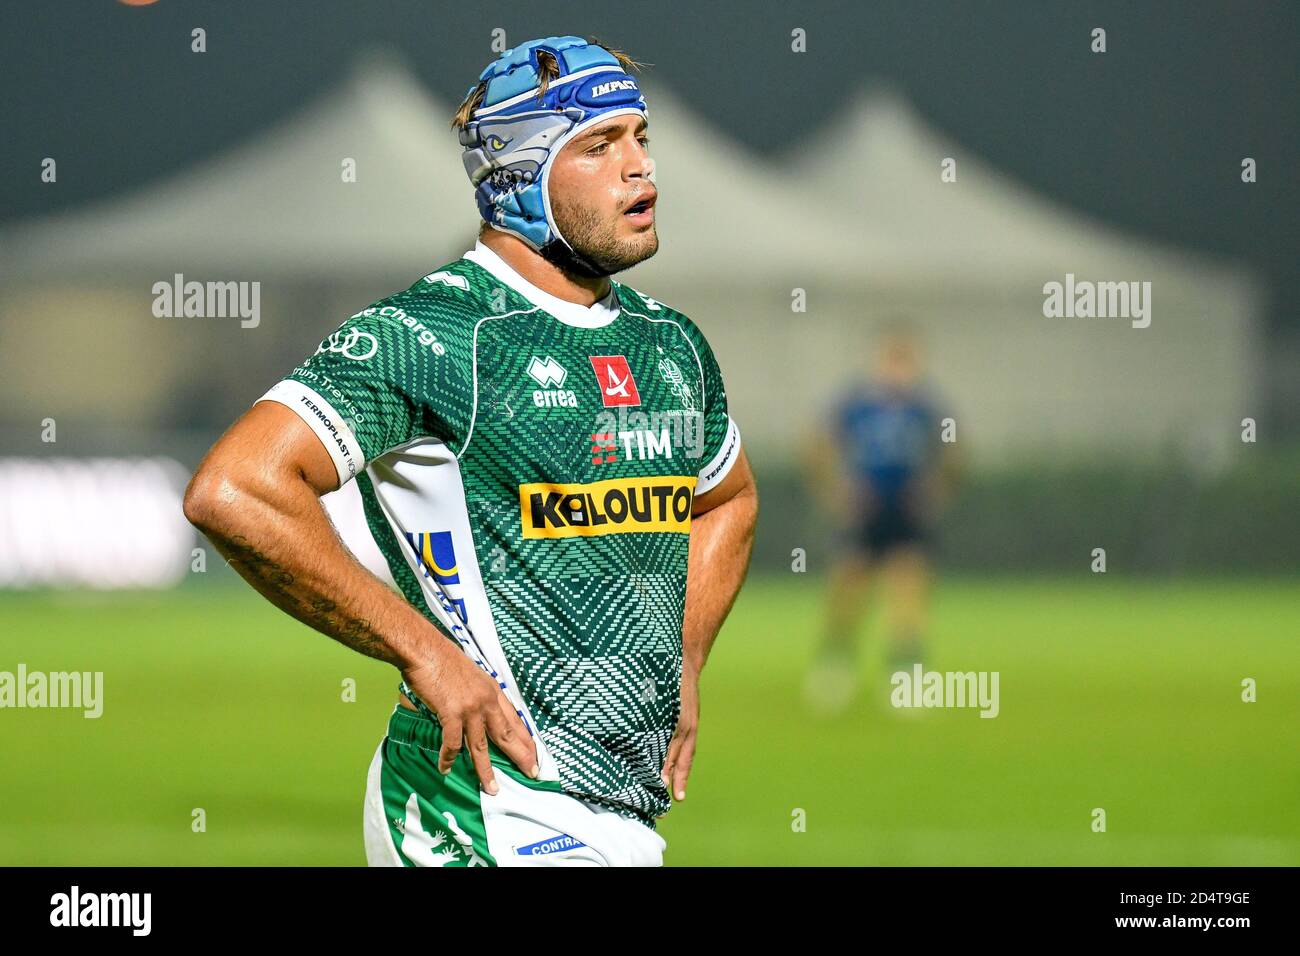 Ianmarco Lucchesi (Treviso) durante Benetton Treviso vs Leinster Rugby, Rugby Guinness Pro 14, Treviso, Italia, 10 Oct 2020 crédito: LM/Ettore Griffoni Foto de stock